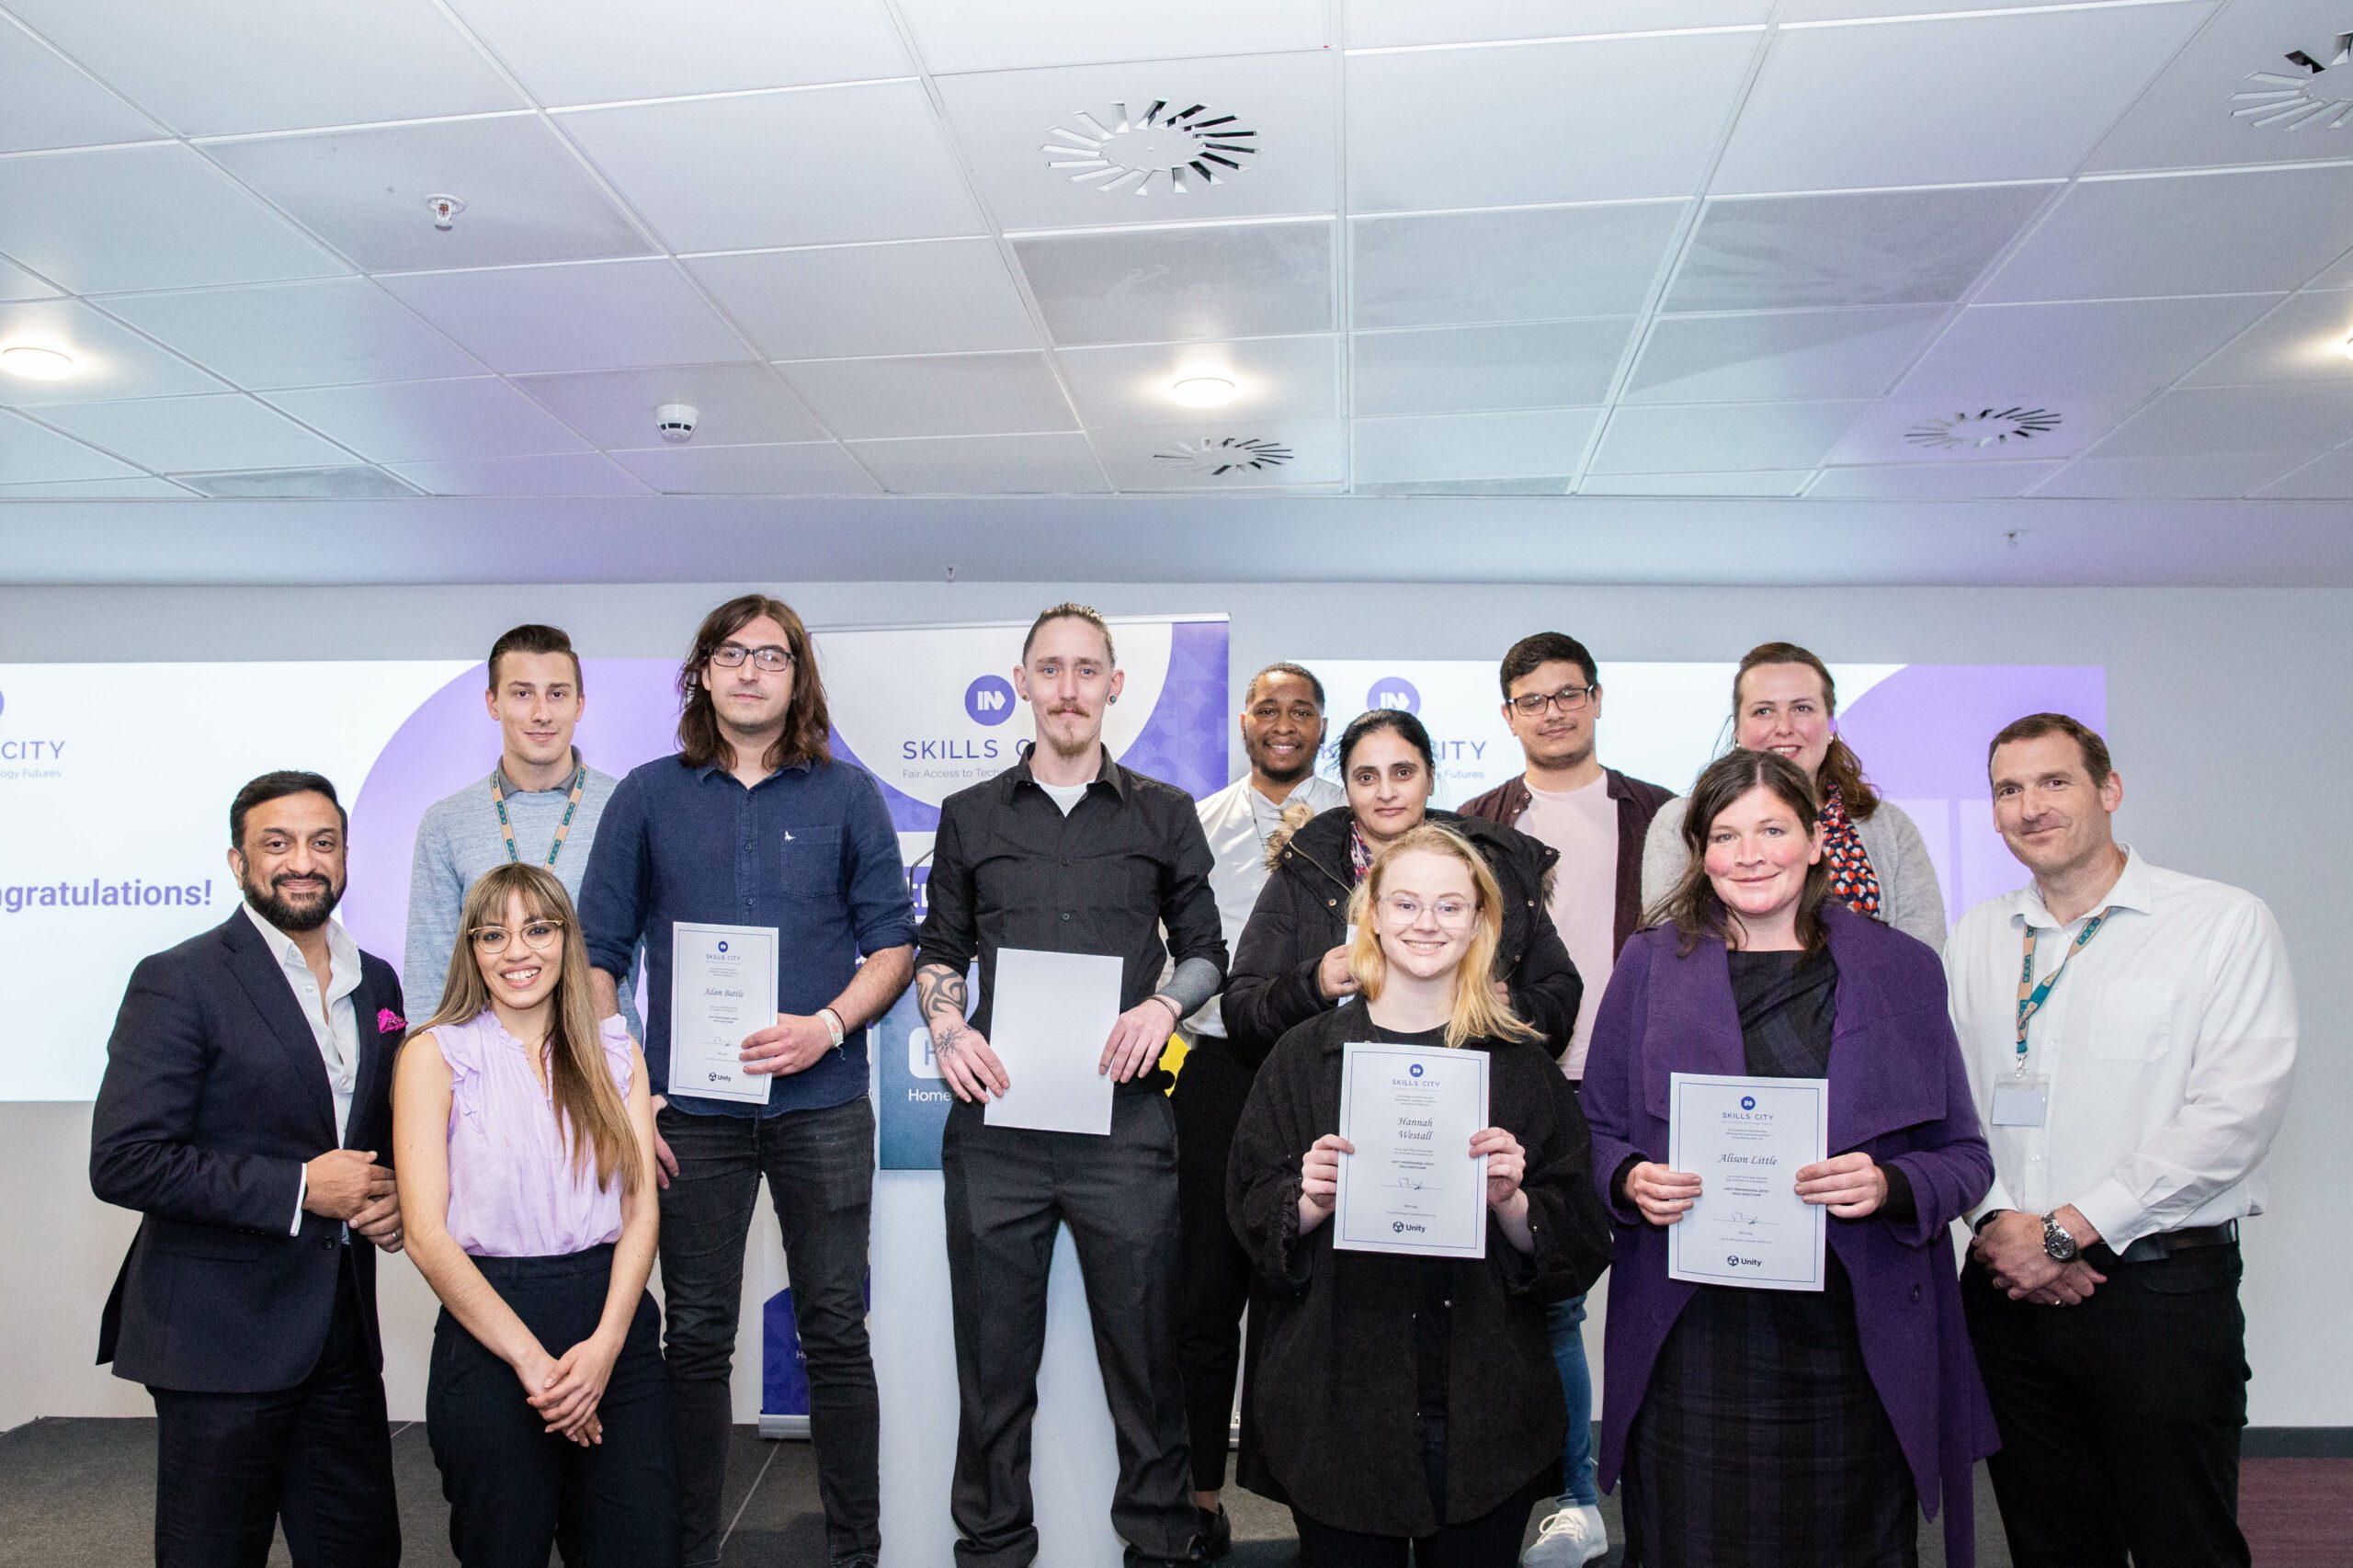 Skills City graduates with Mo Isap, CEO of IN4 Group on the far left and Simon Benson, Immersive Technology Director at IN4 Group on the far right).